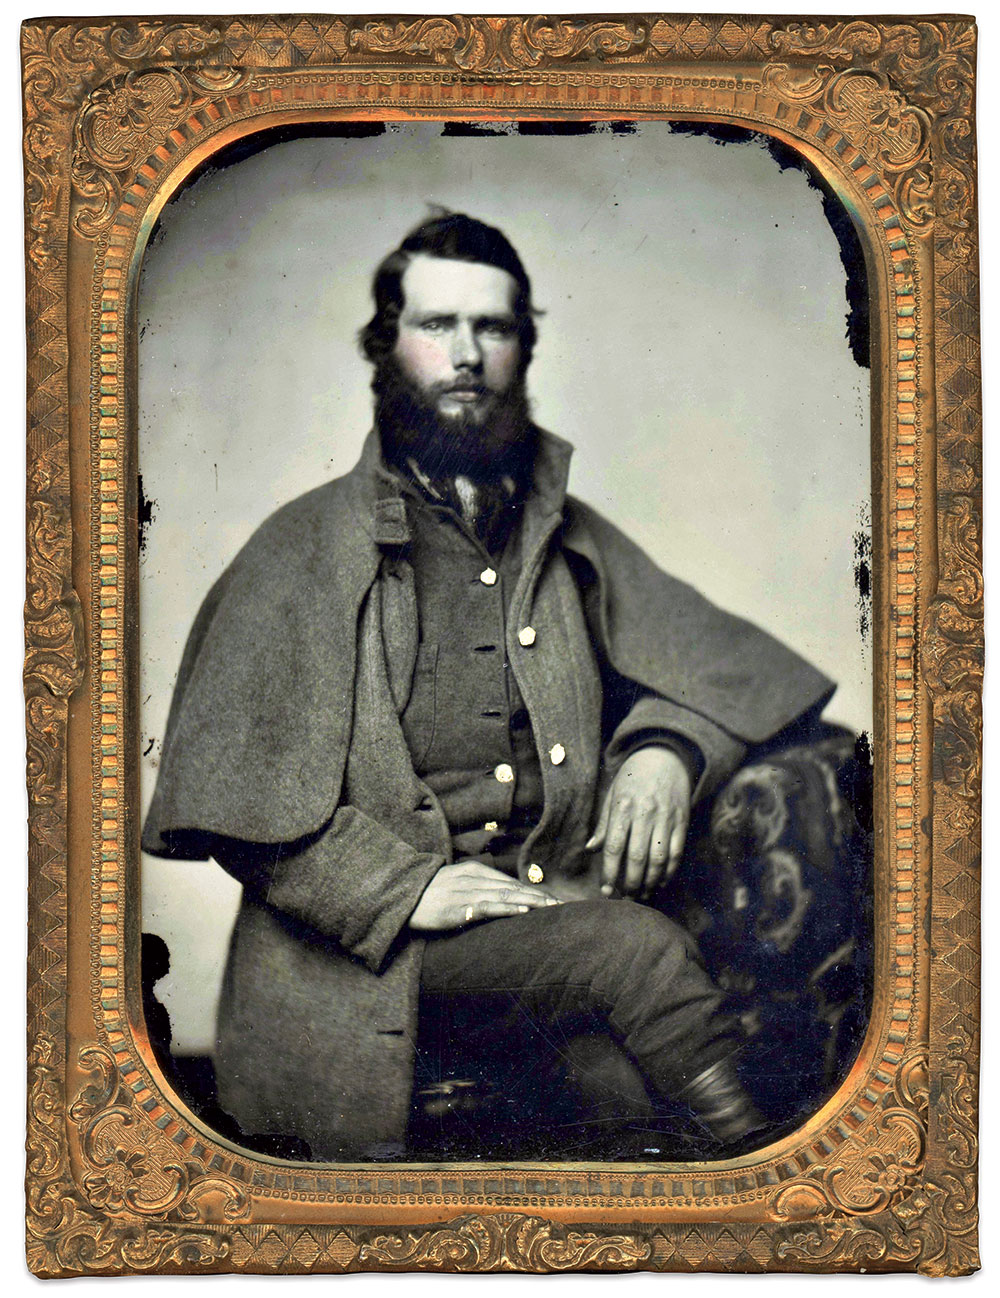 Quarter plate ambrotype attributed to Rees. Dan Binder Collection.